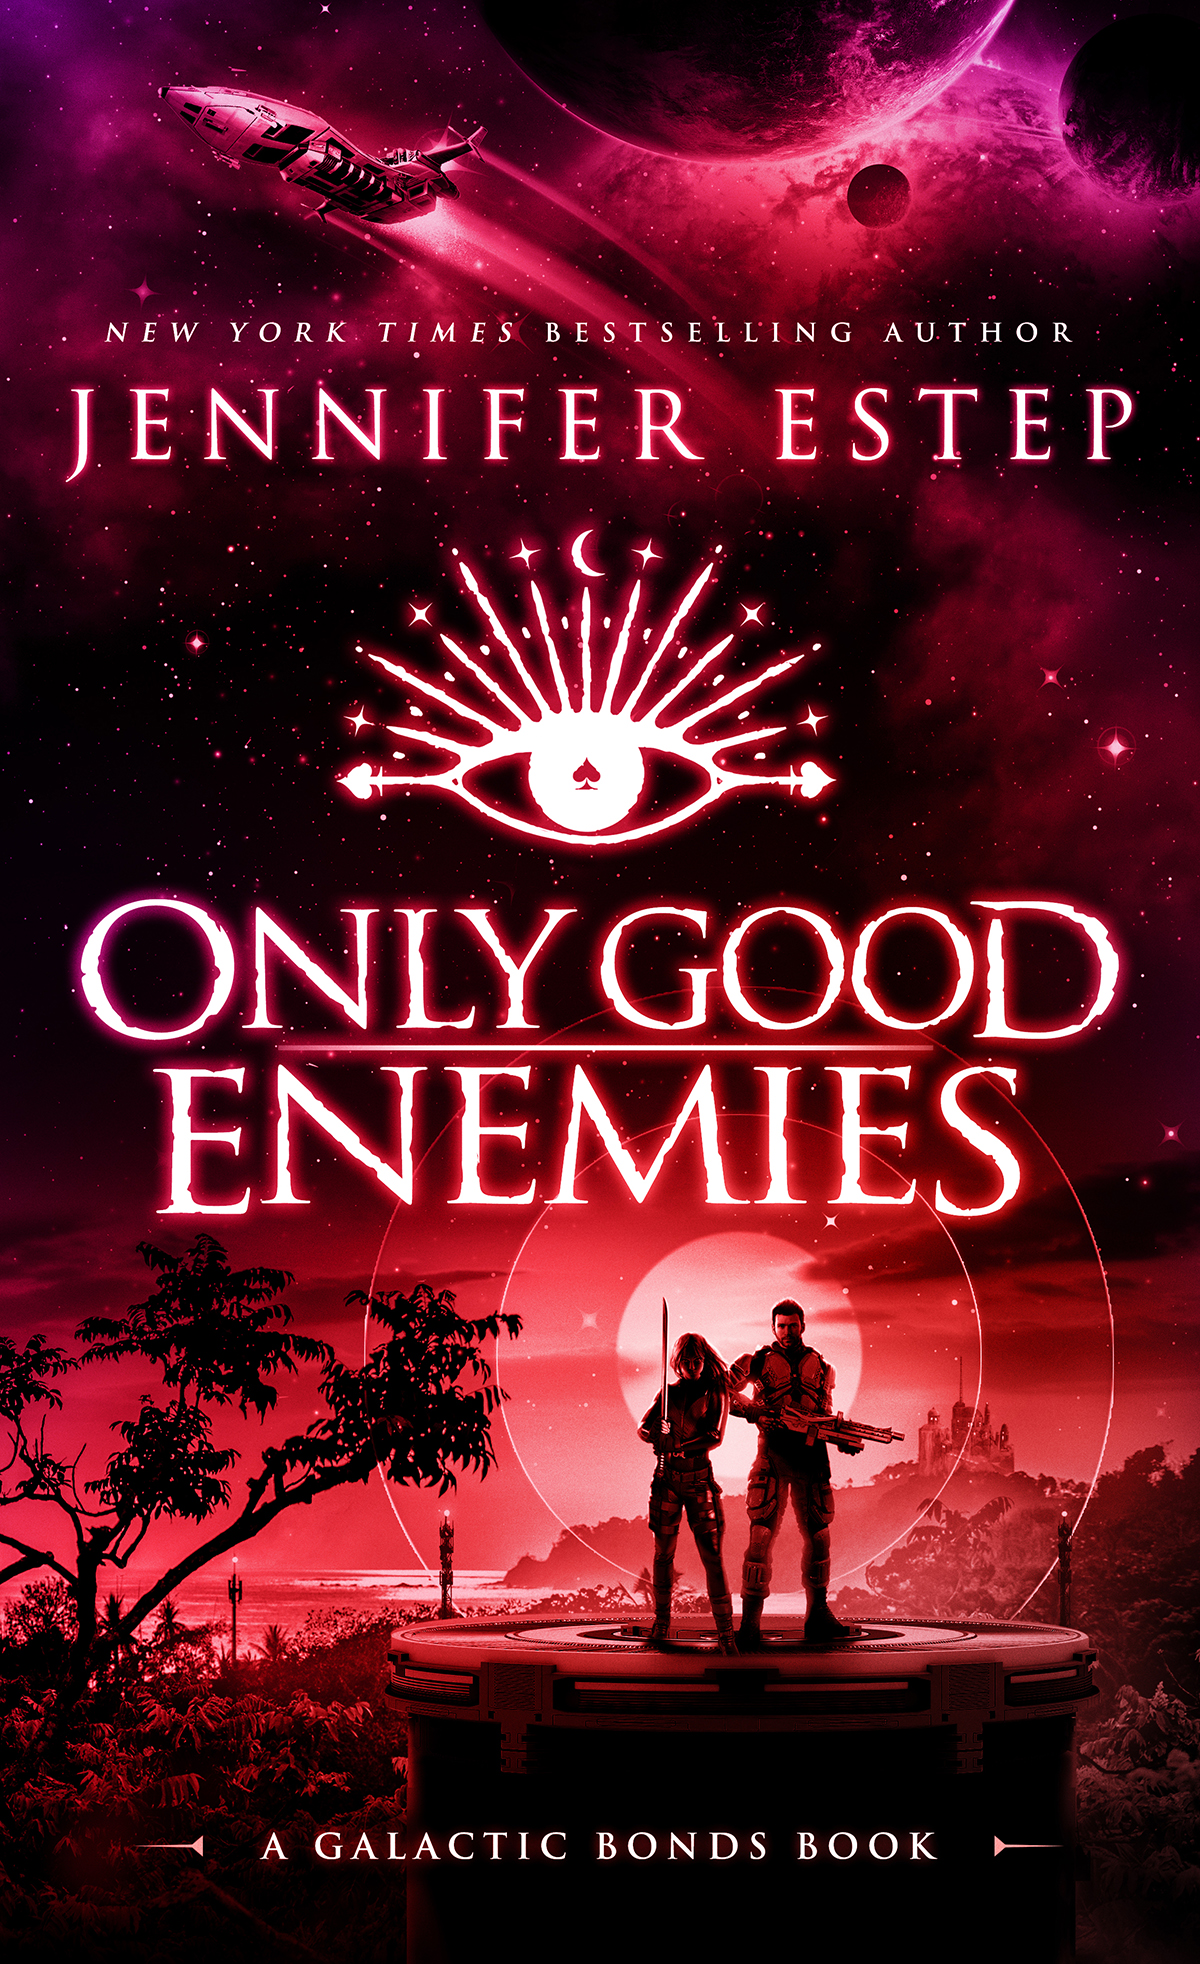 Only Good Enemies red cover art with couple